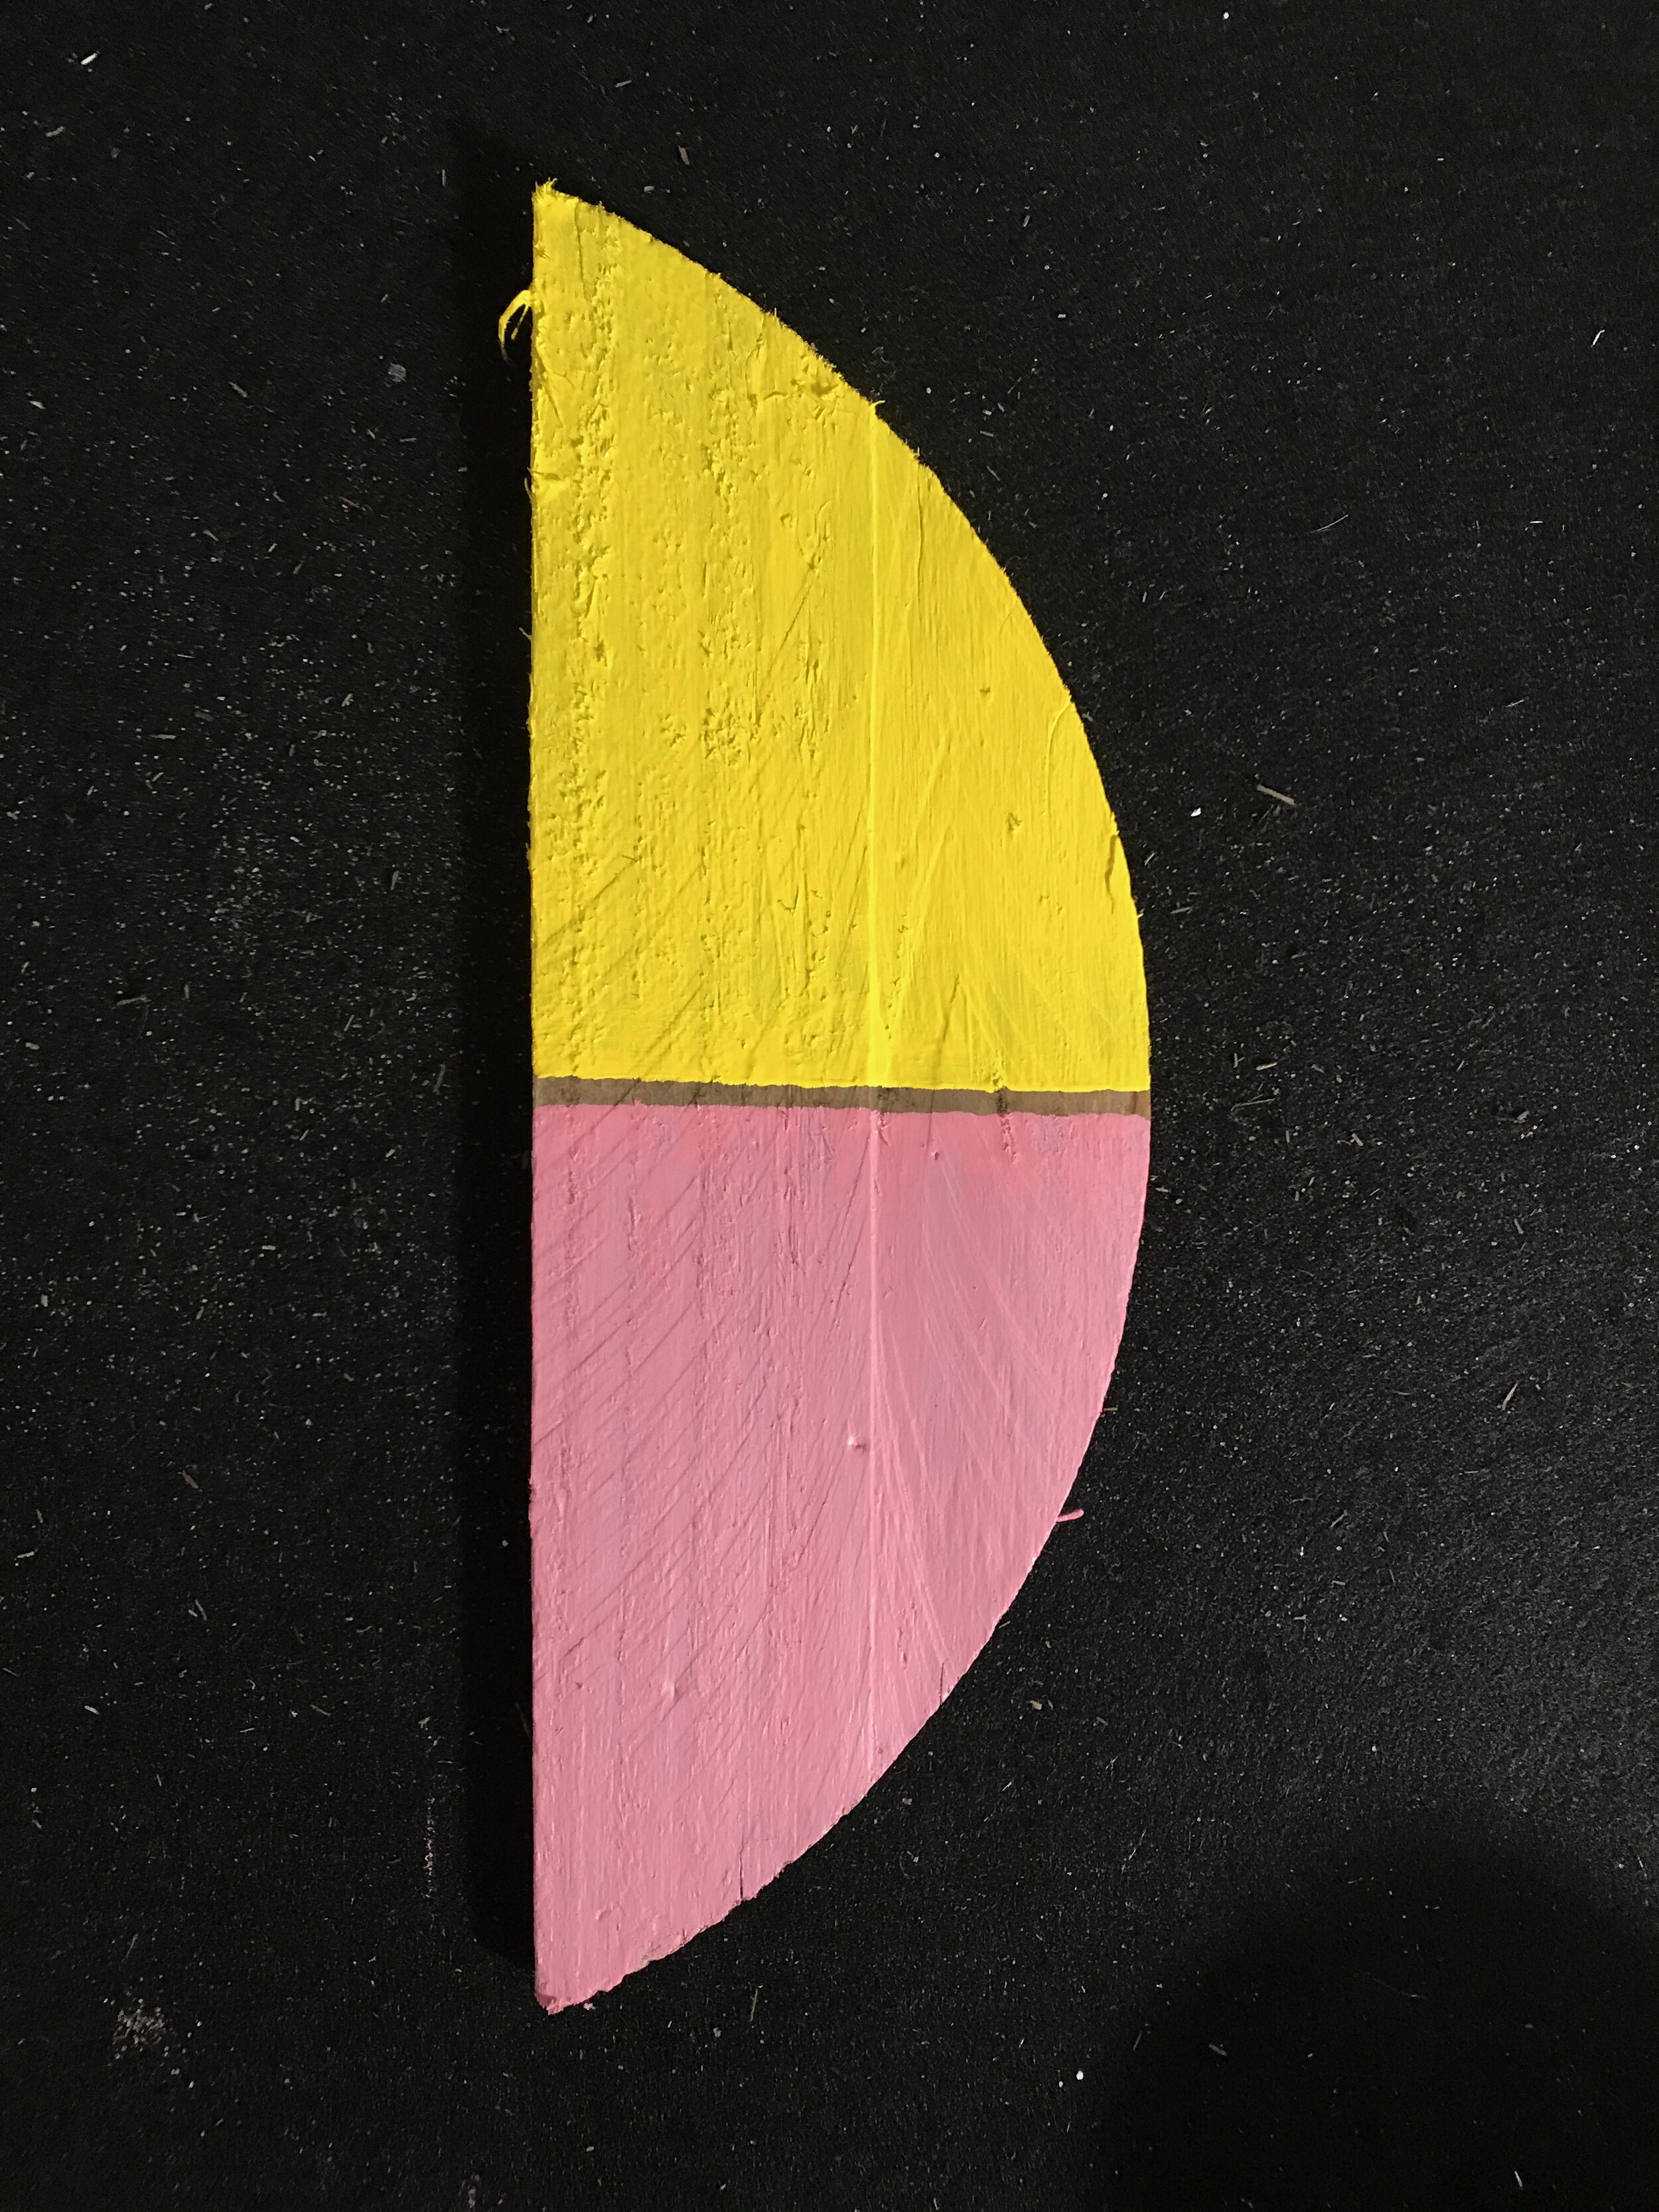 Untitled (balance), 2020, Acrylic on found wood collected at Rockaway Beach. 12 x 5 x .5 inches